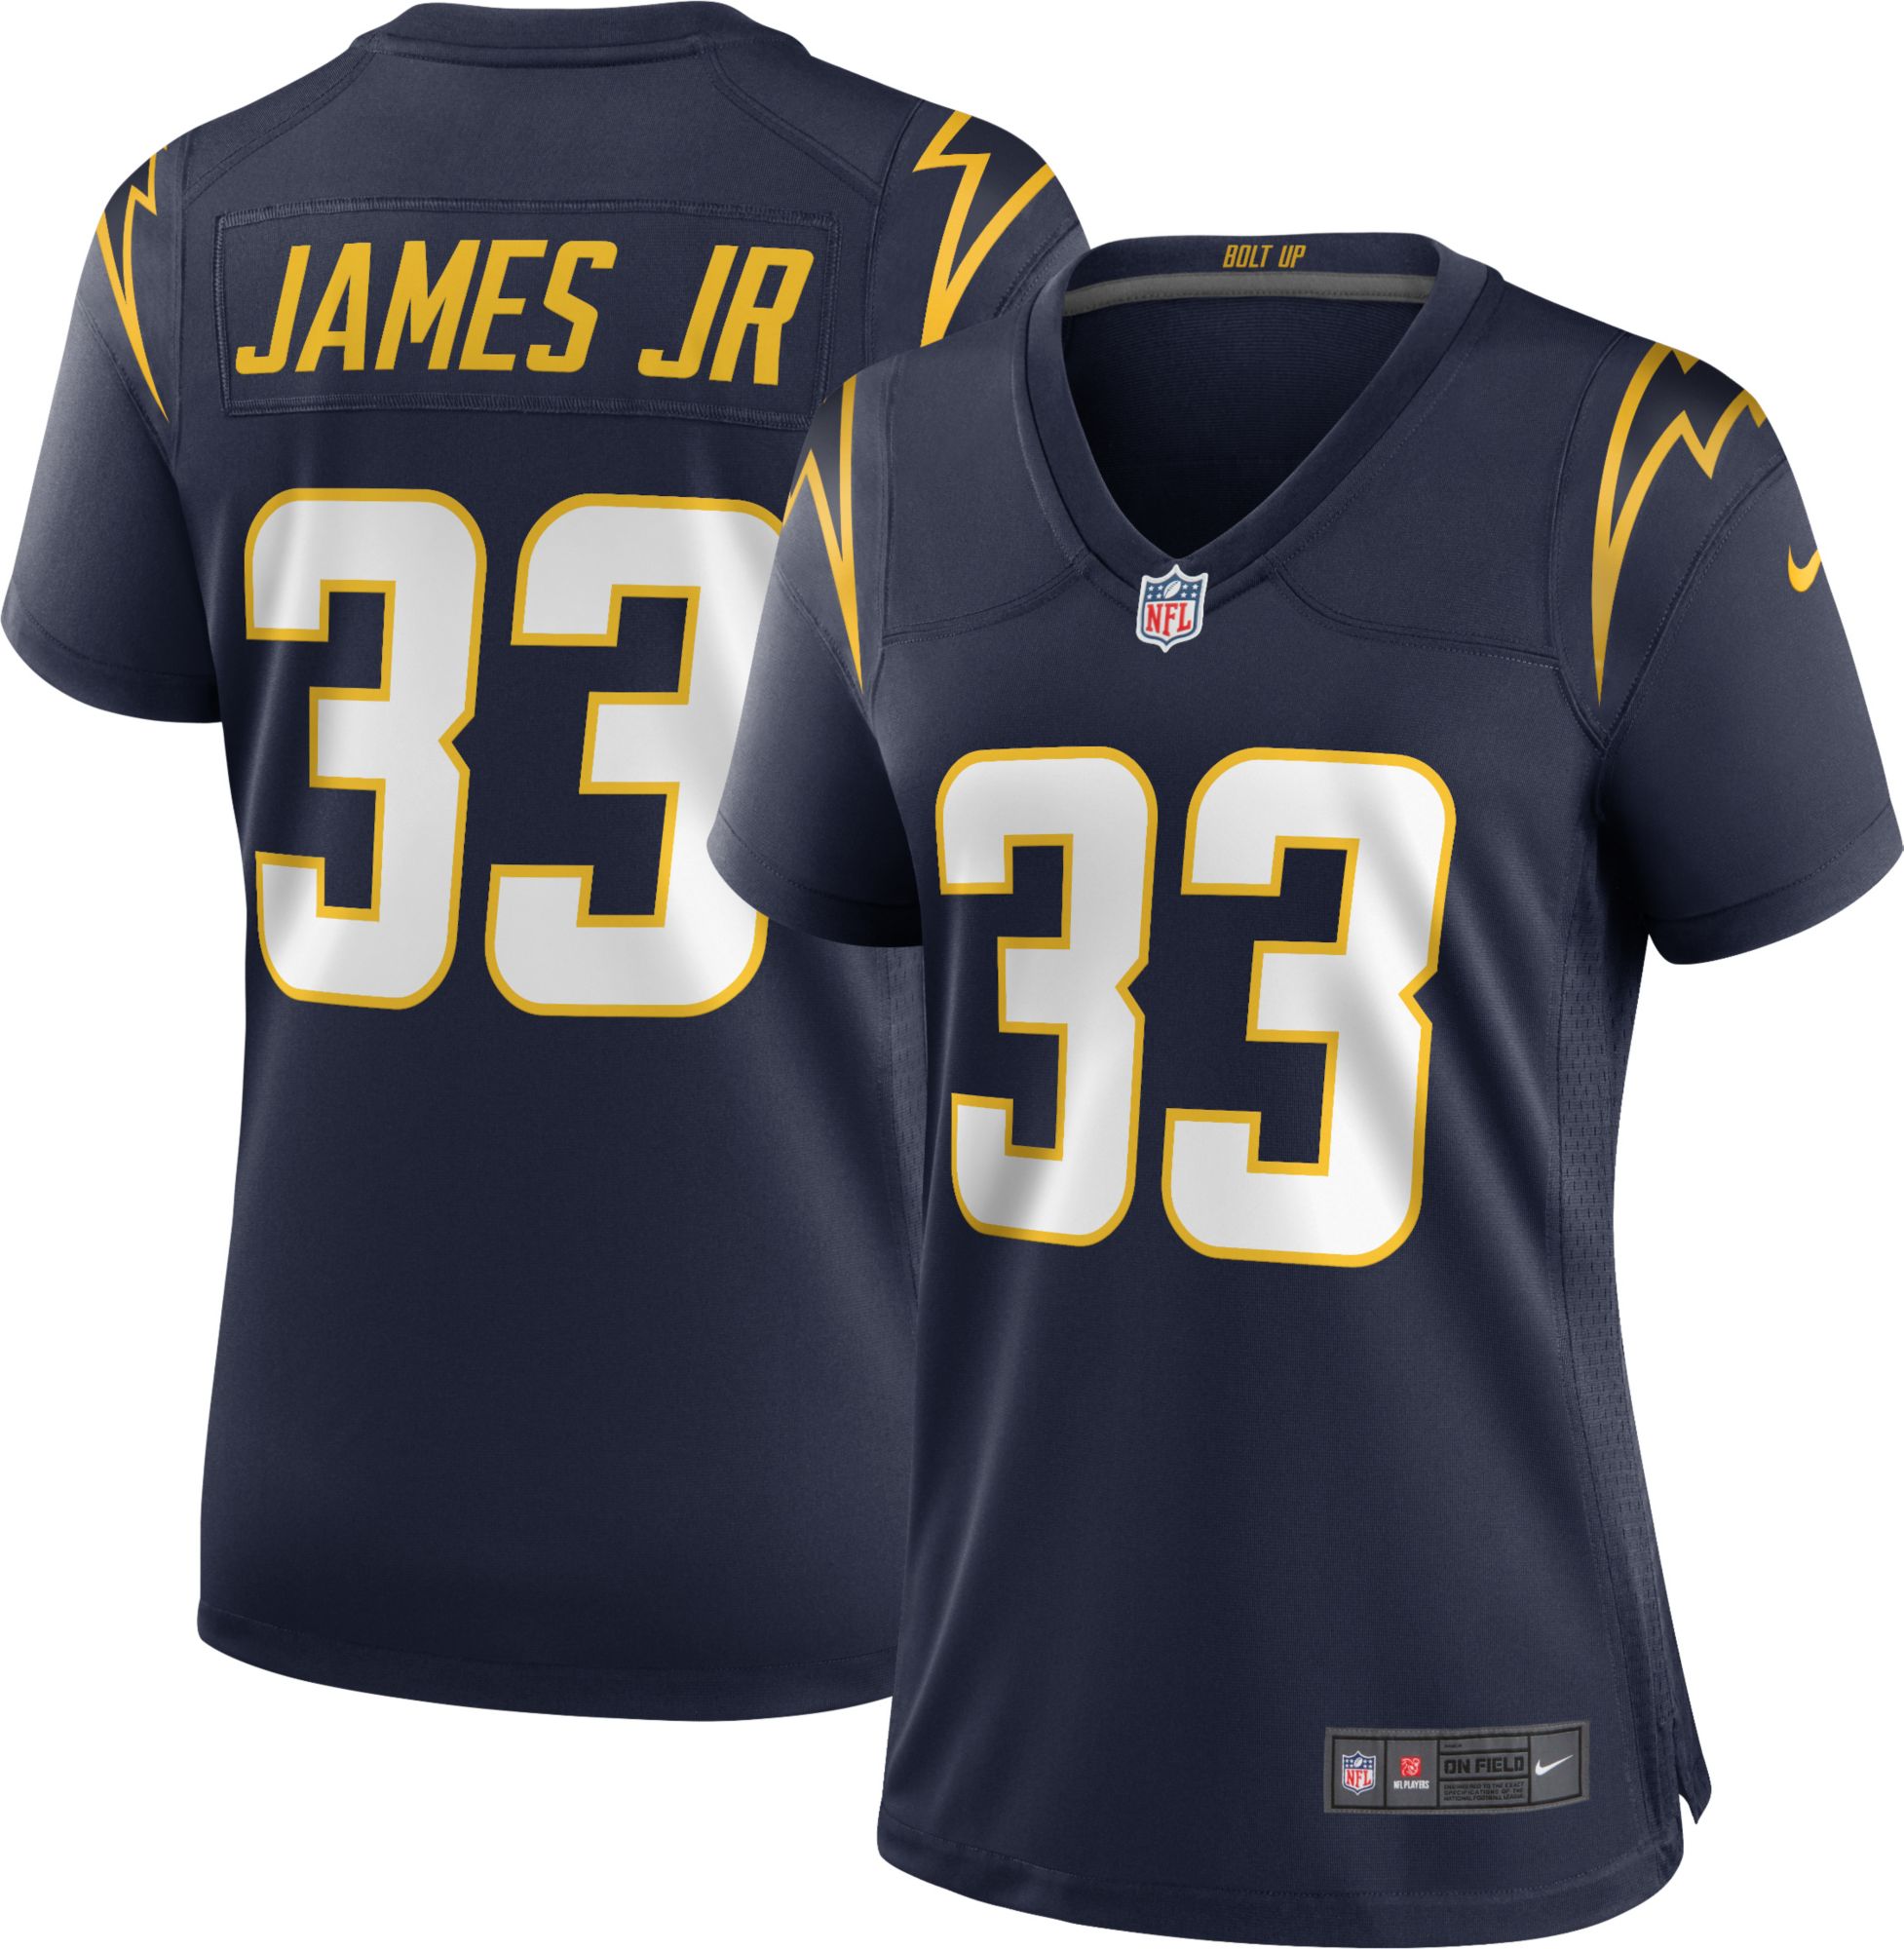 chargers jersey women's